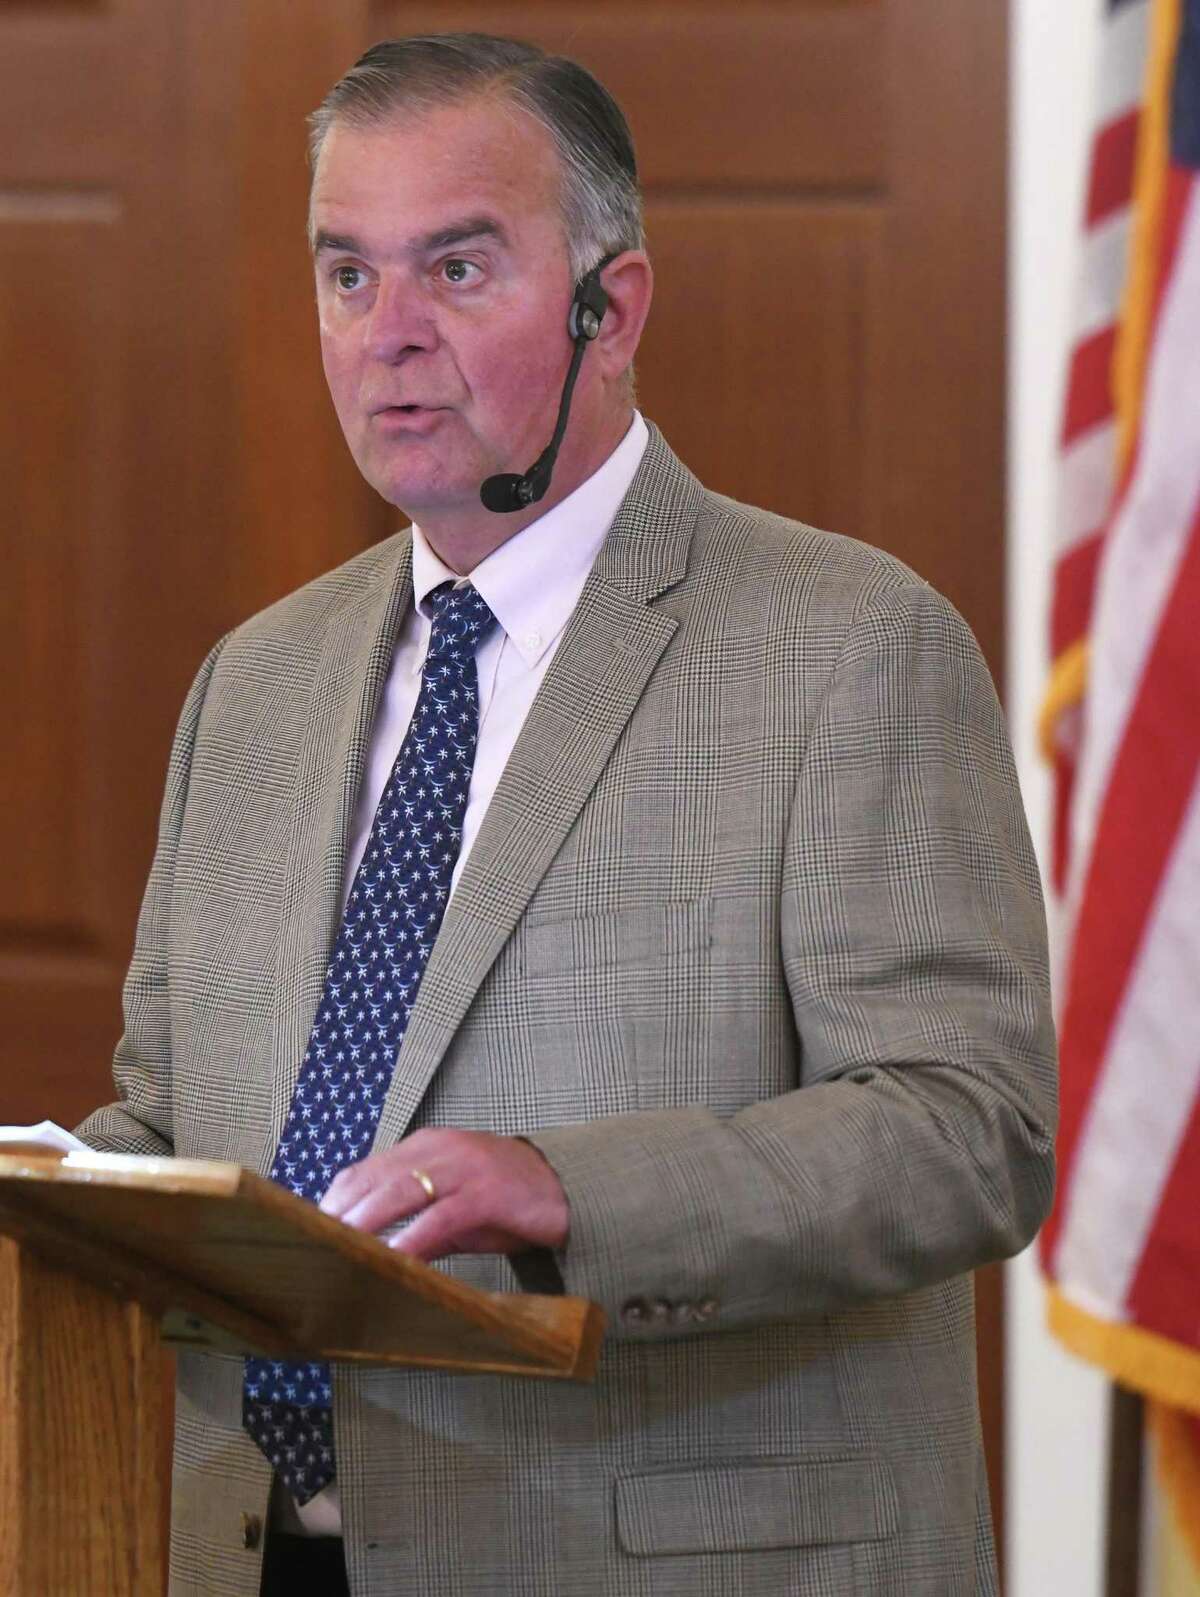 State Rep. Steve Meskers, D-Greenwich, seen here speaking earlier this month before the Retired Men’s Association, is resisting calls from local Republicans to resign after an angry email exchange.